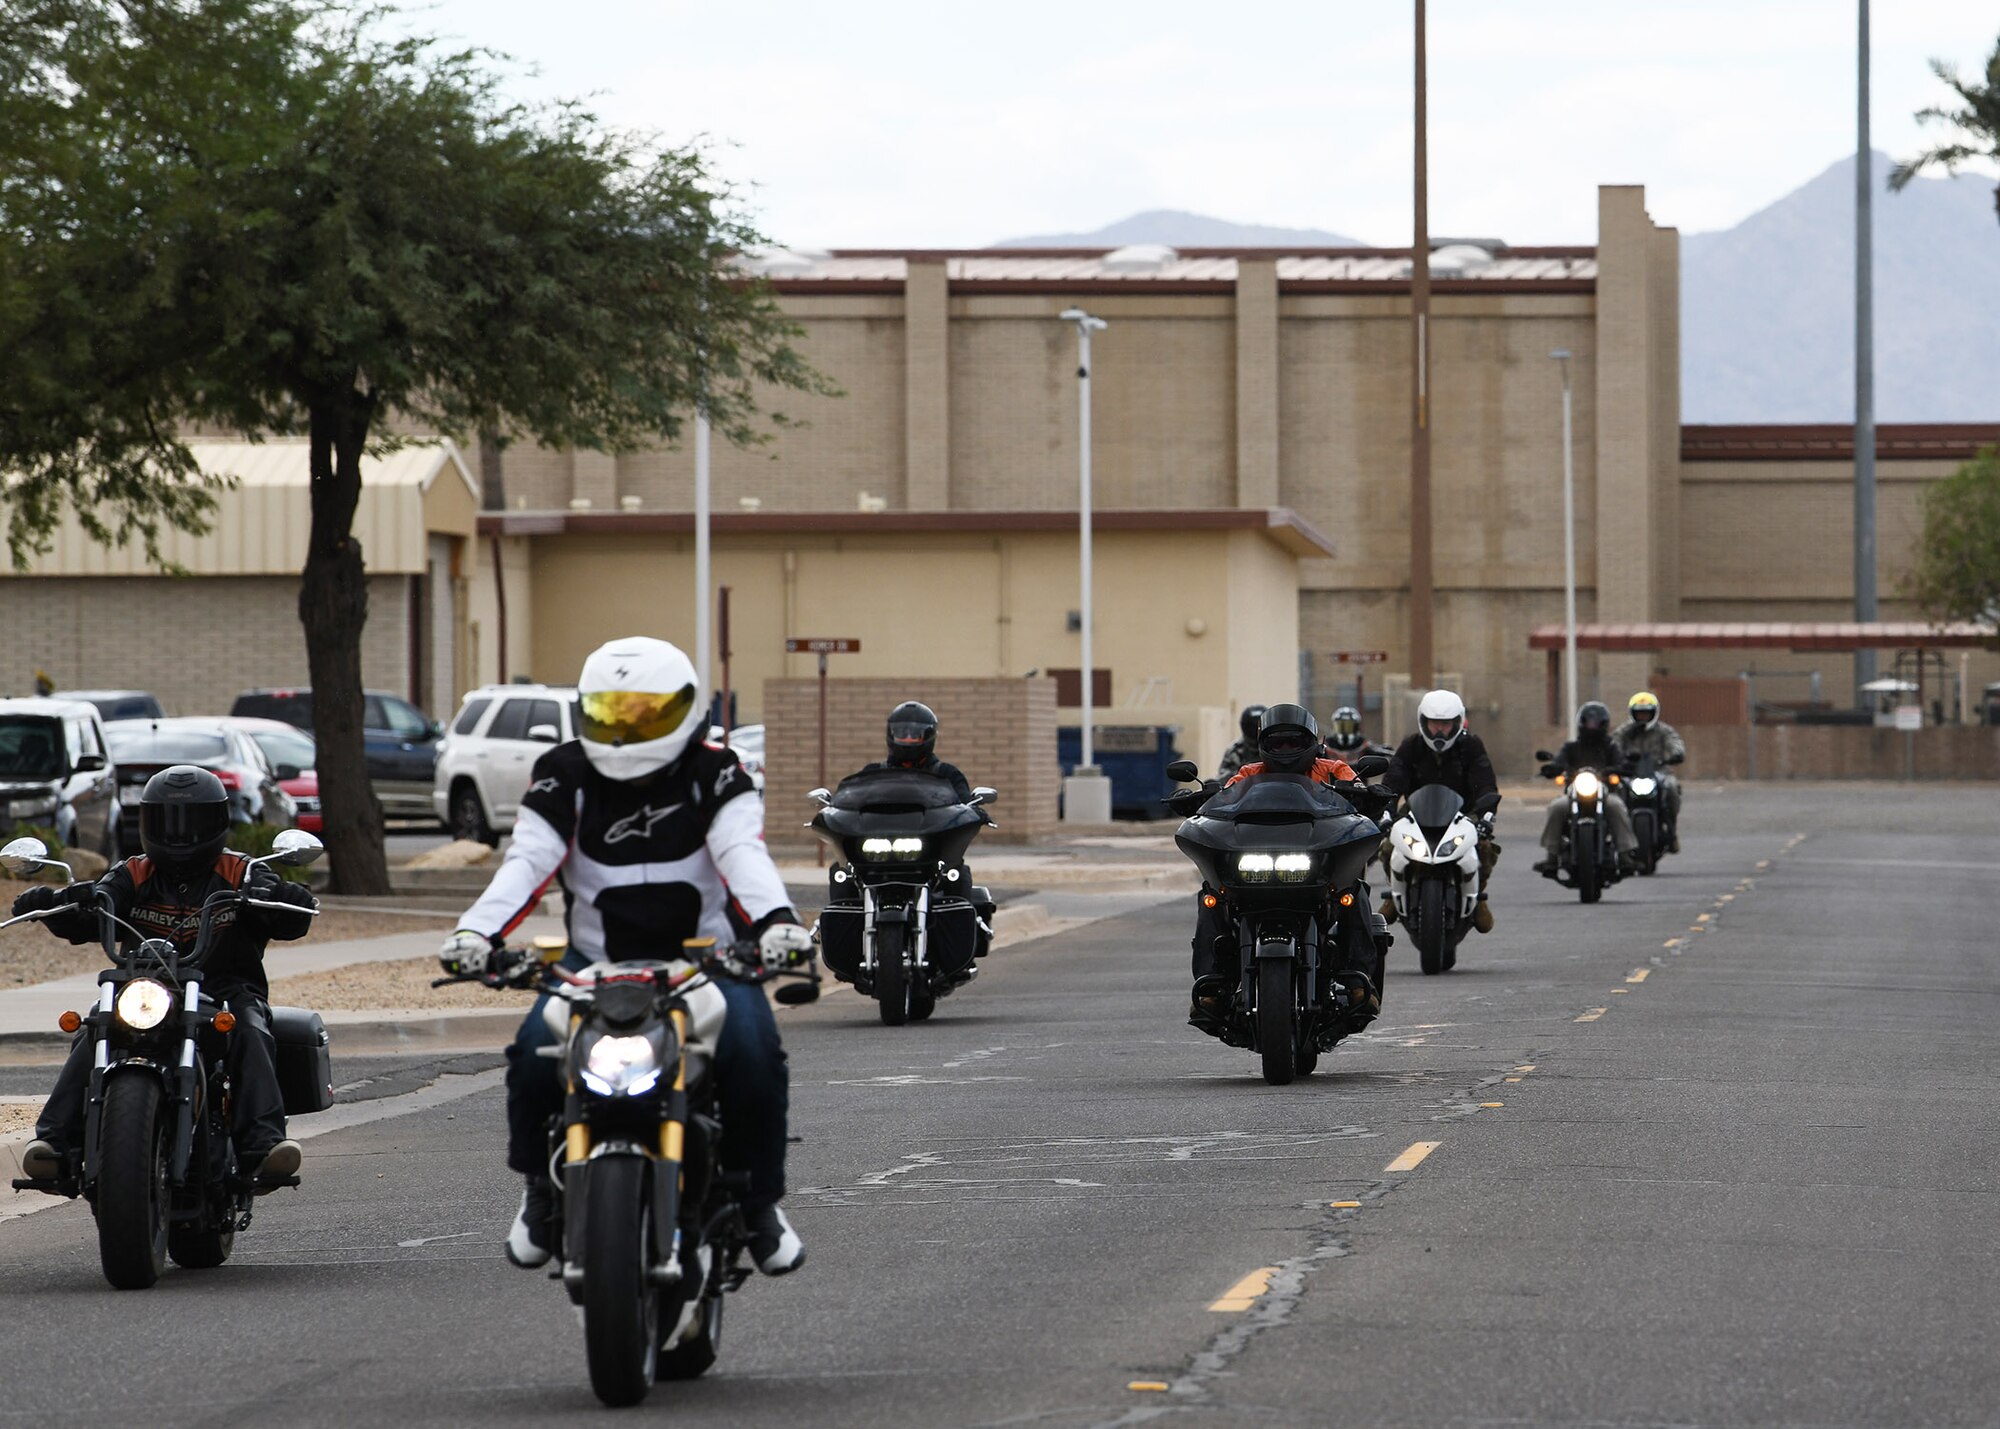 Members of the 944th Fighter Wing depart on a motorcycle safety program mentorship ride Nov. 8 at Luke Air Force Base, Ariz. The program provides members with their required motorcycle safety training certification.